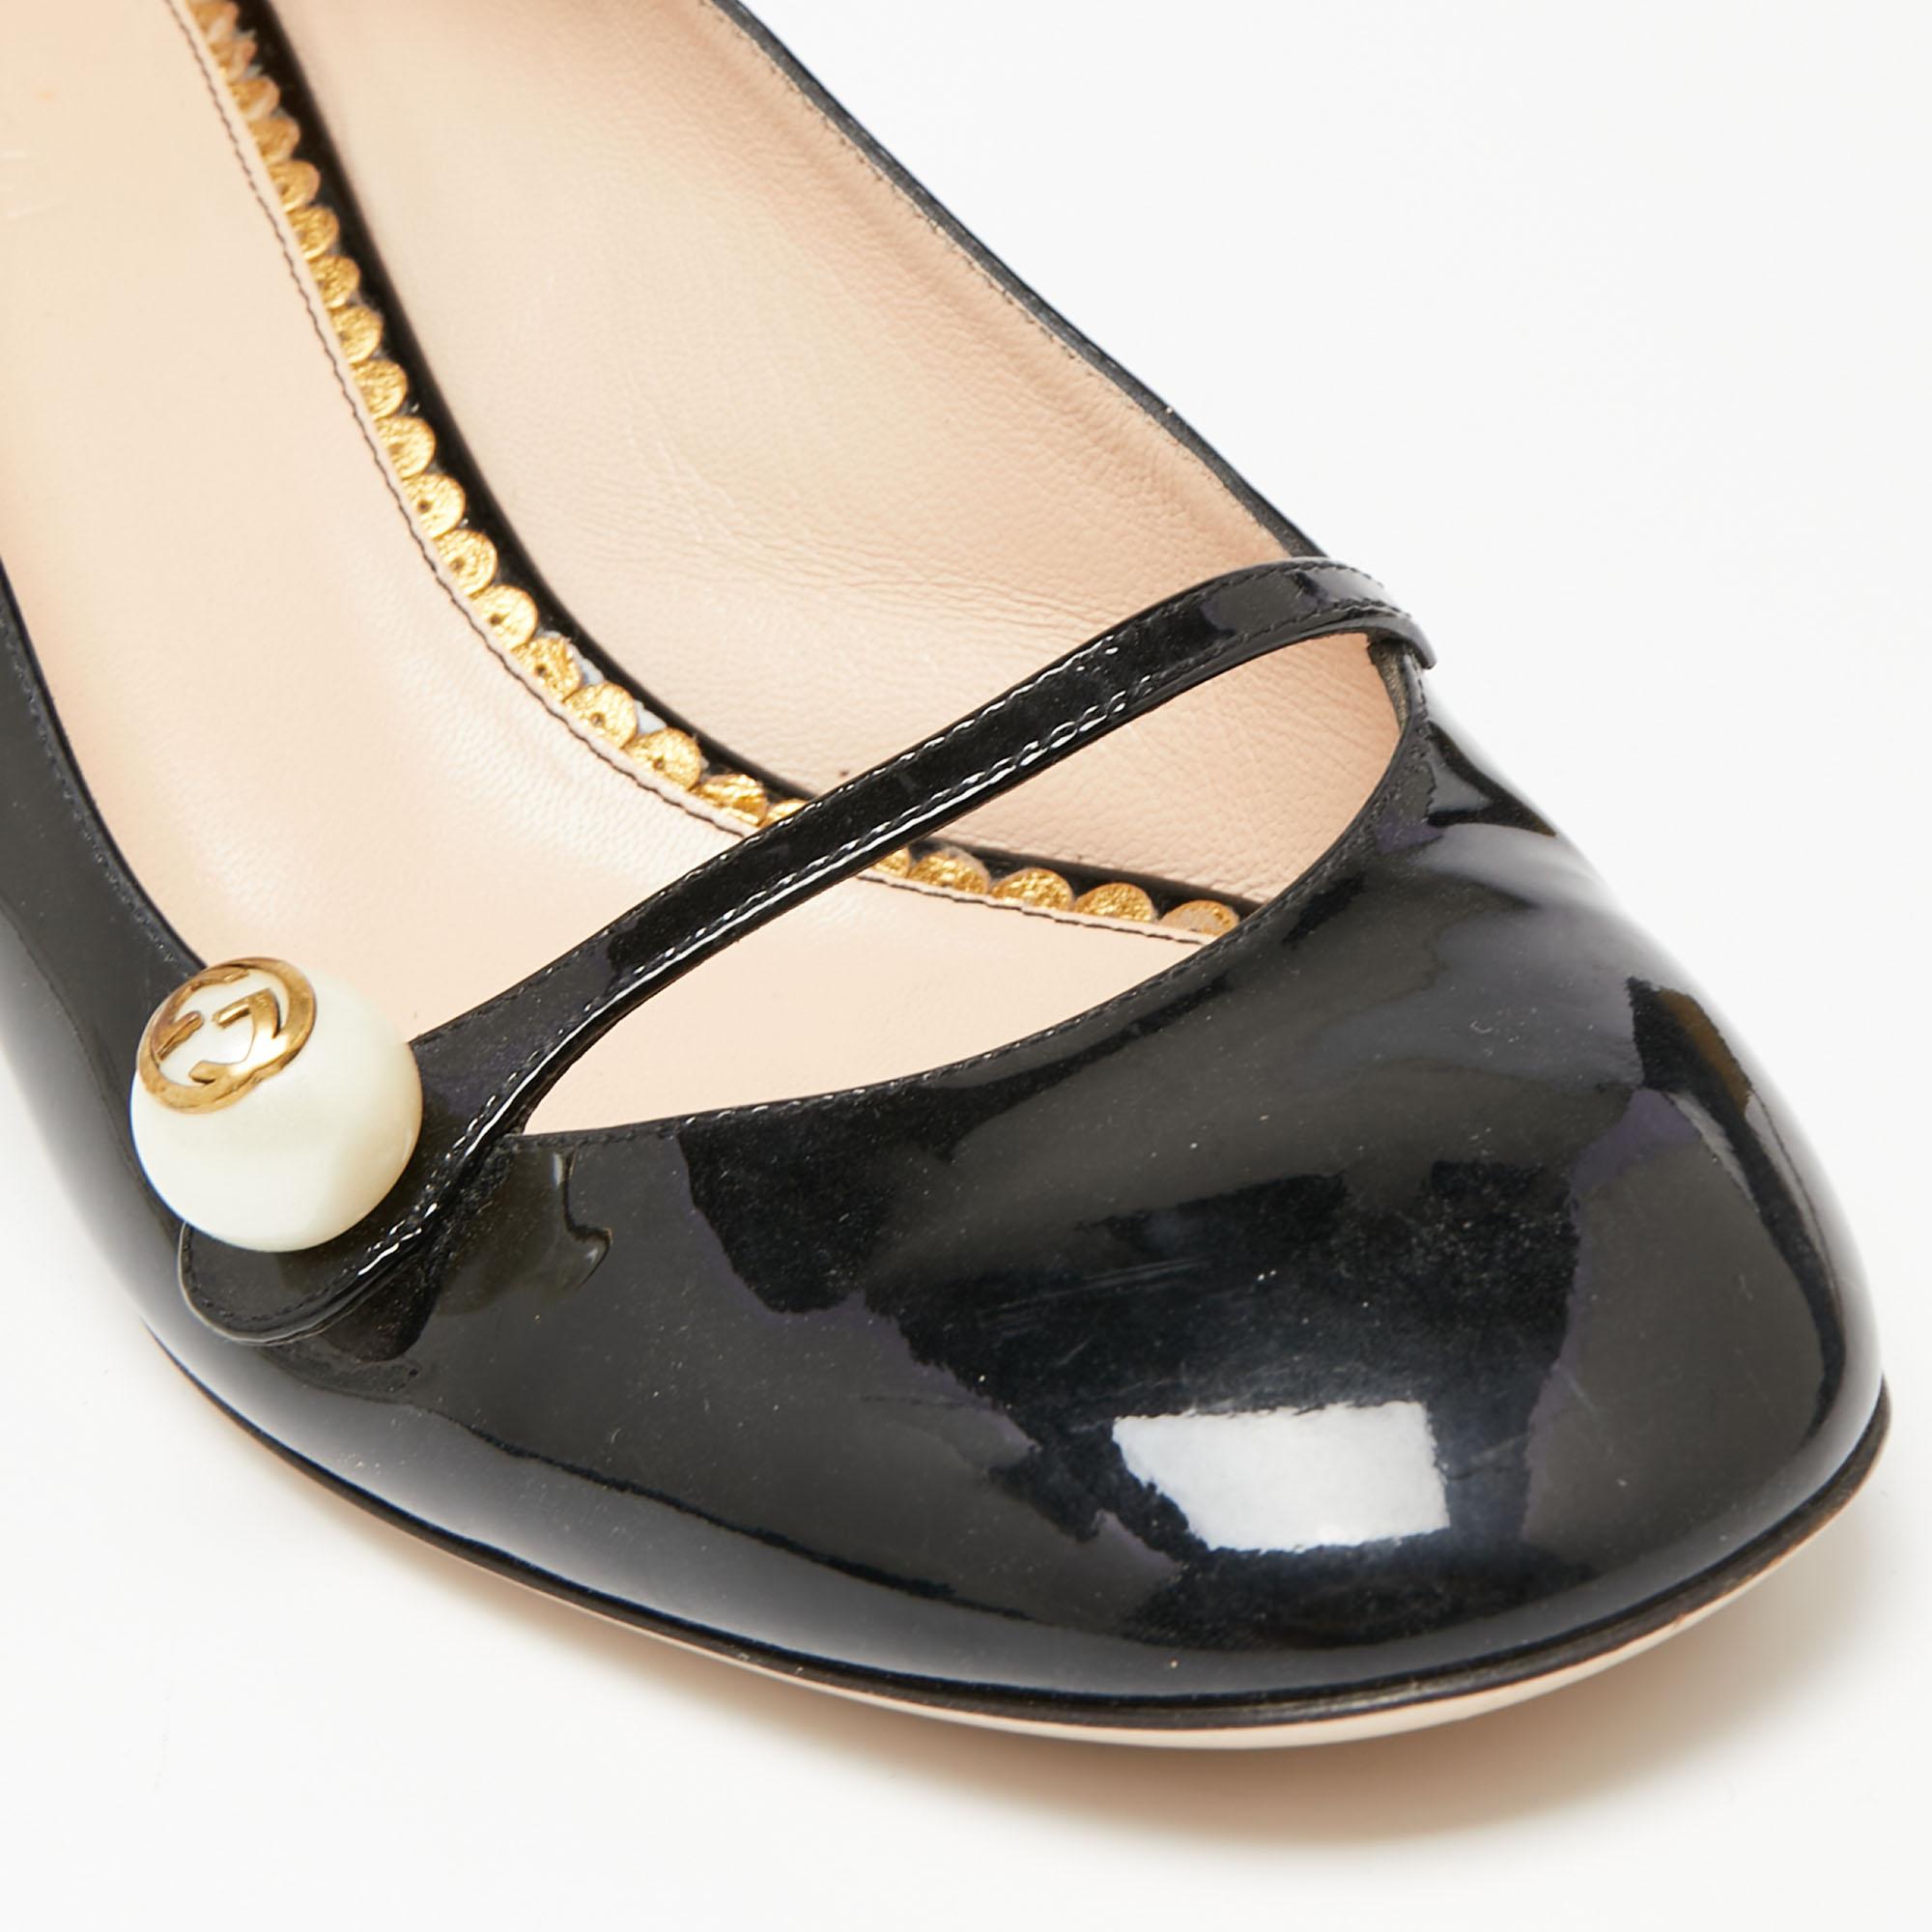 Gucci Black Patent Leather Pearl Embellished Block Heel Pumps Size 39.5 5